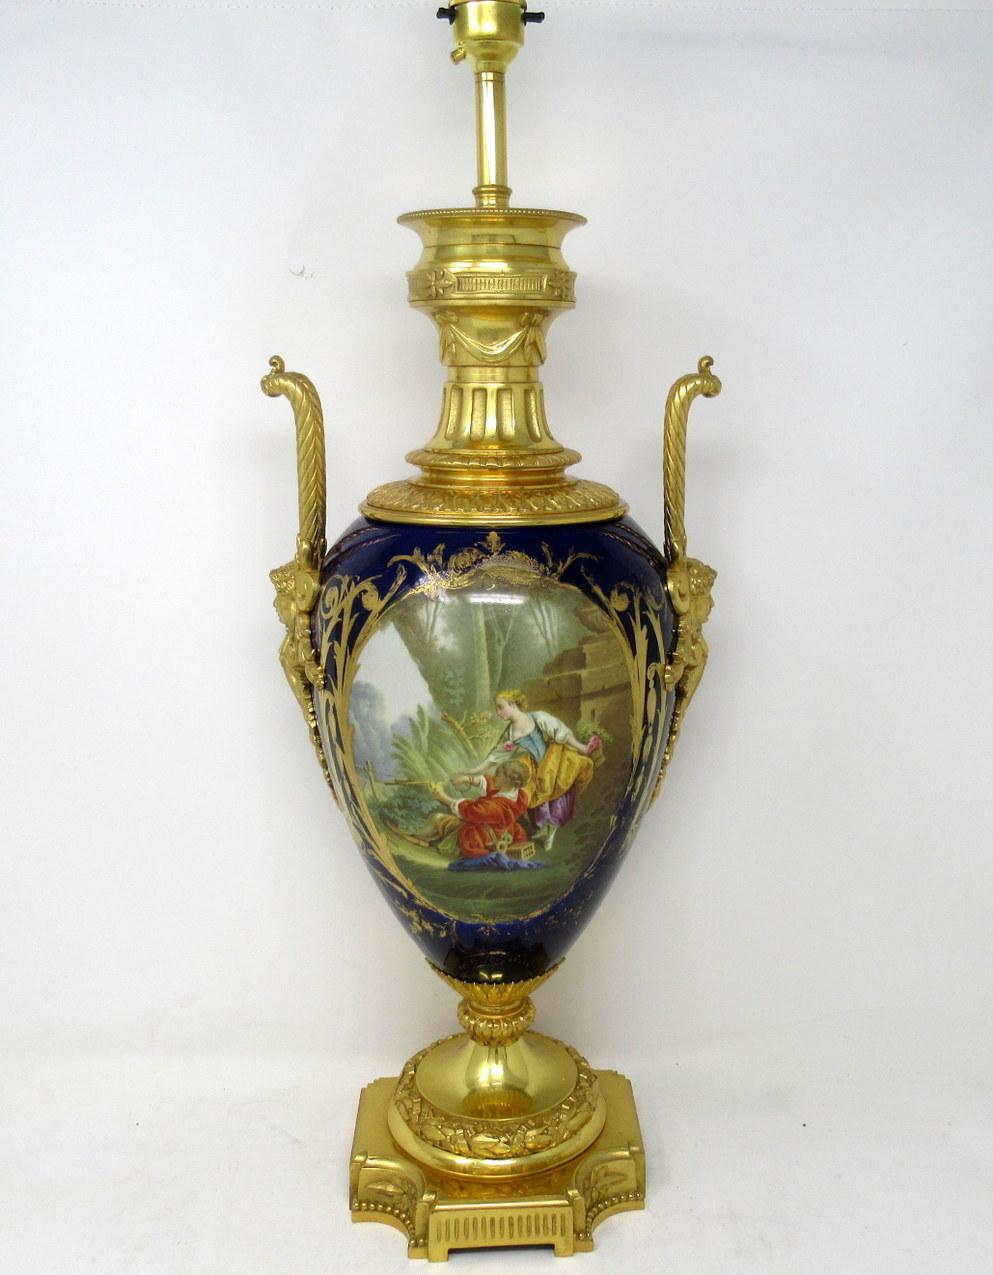 Stunning French Sèvres soft paste porcelain and ormolu twin handle electric table lamp of traditional urn form, and of large size proportions, raised on a square stepped base with ornate canted corners, mid-19th century.

The twin lavish cast